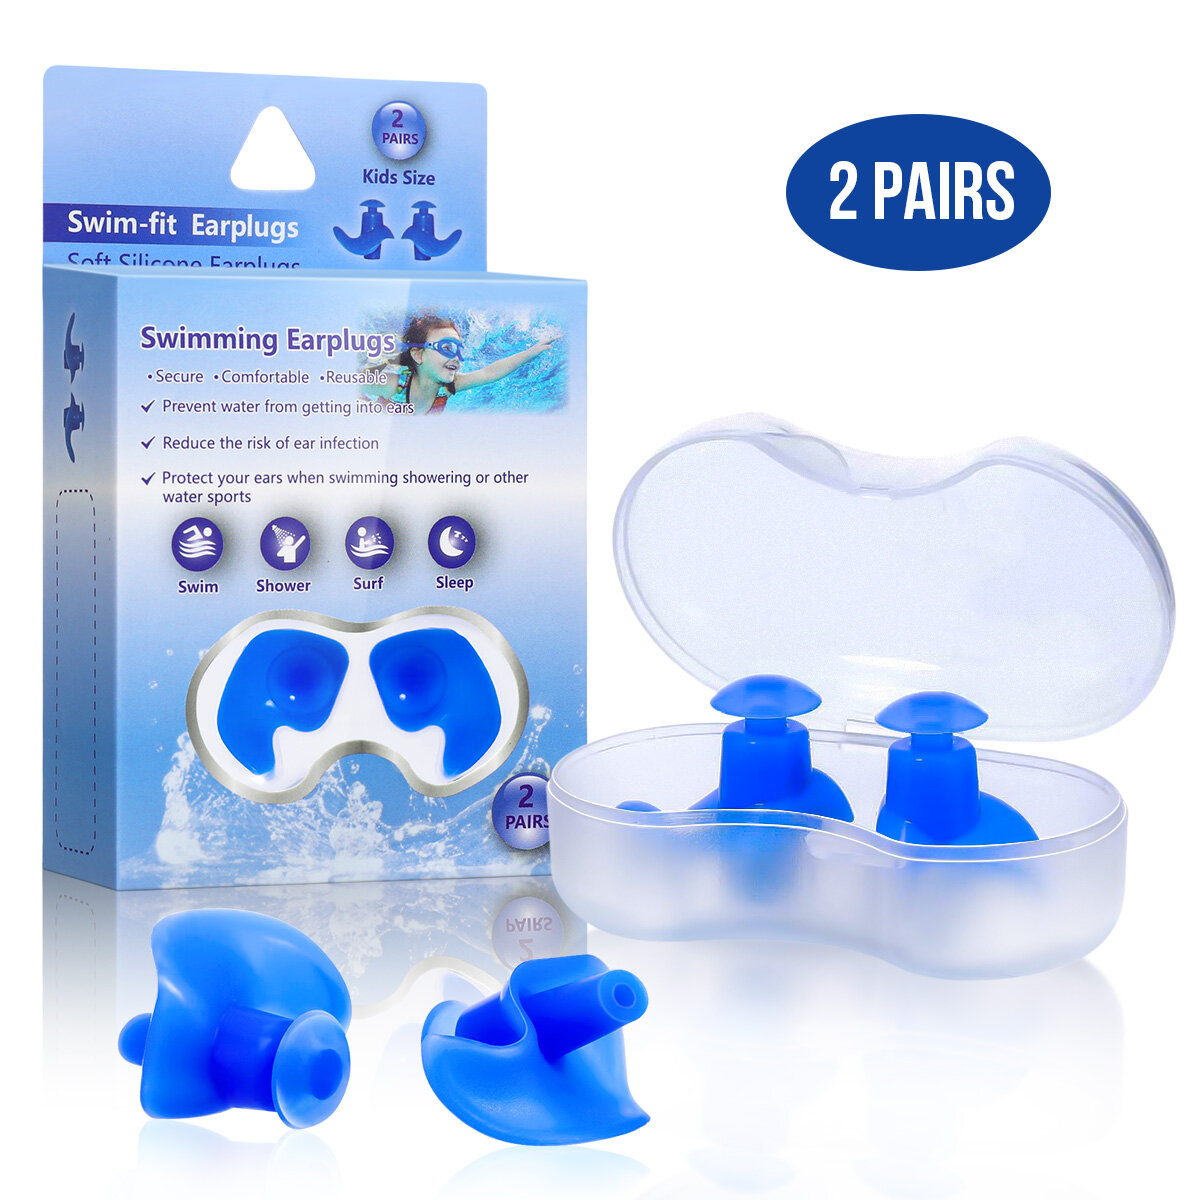 2 Pairs Kids Upgraded Silicone Swimming EarPlugs Waterproof Reusable Silicone Ear Plugs for Swimming